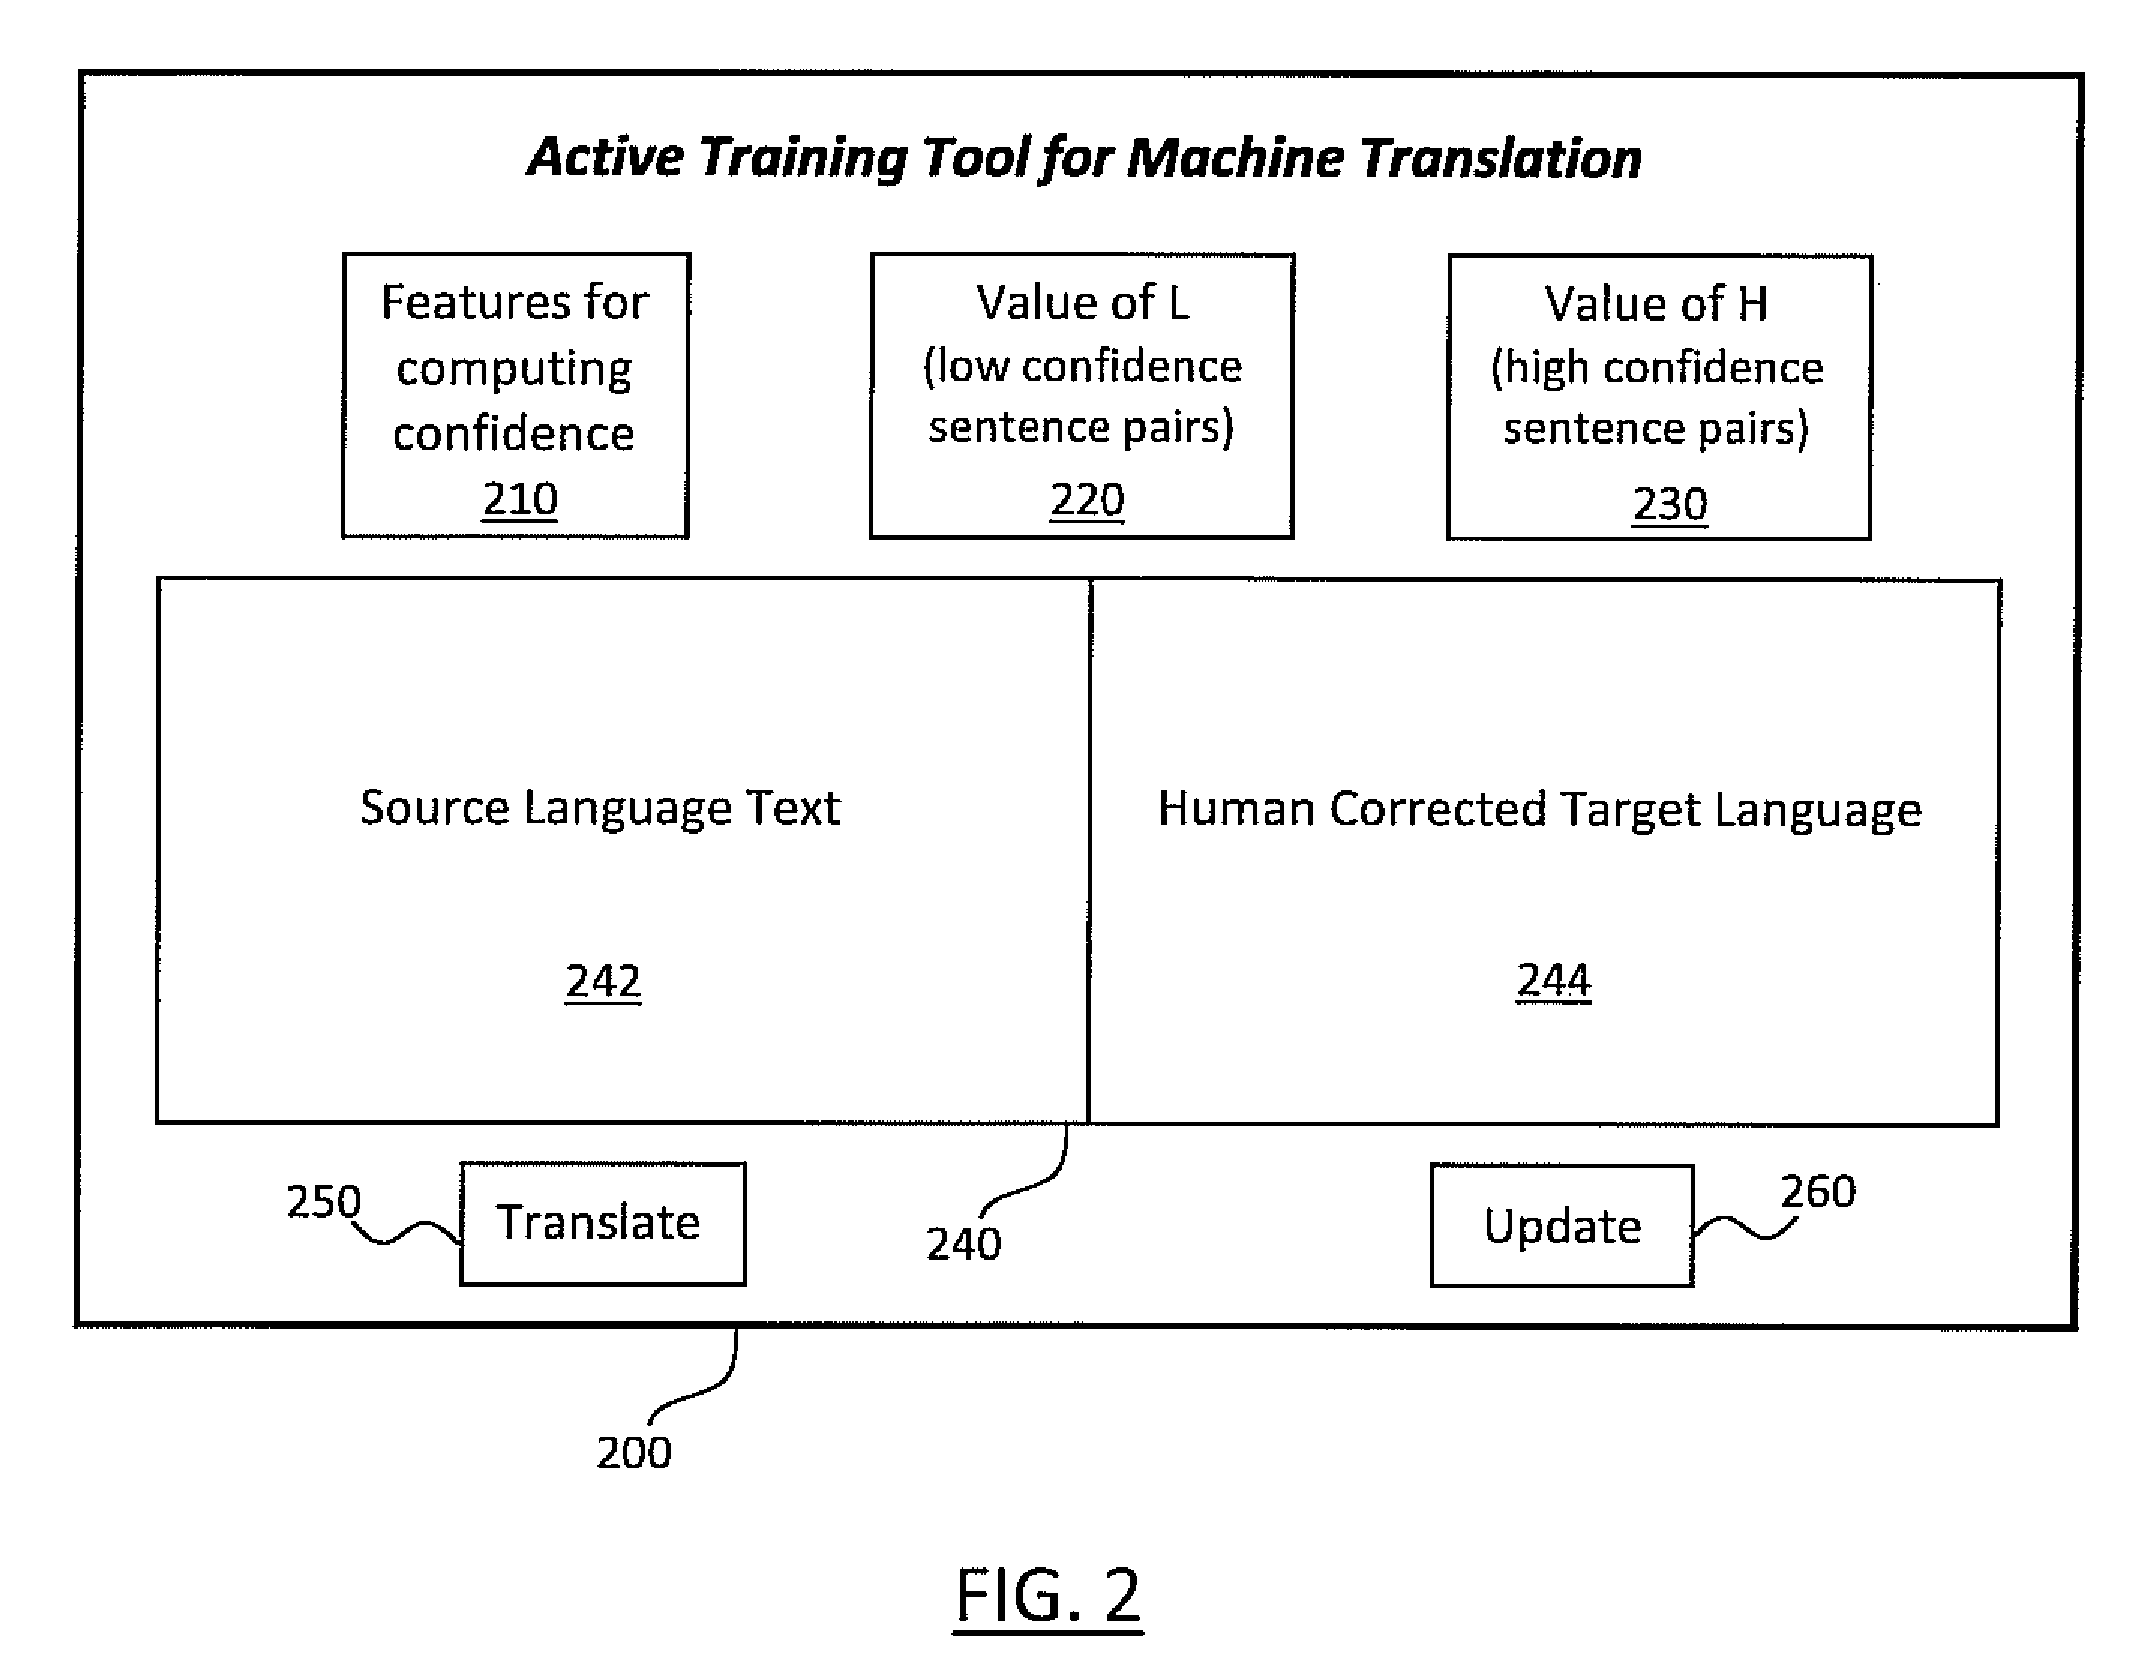 Active learning systems and methods for rapid porting of machine translation systems to new language pairs or new domains